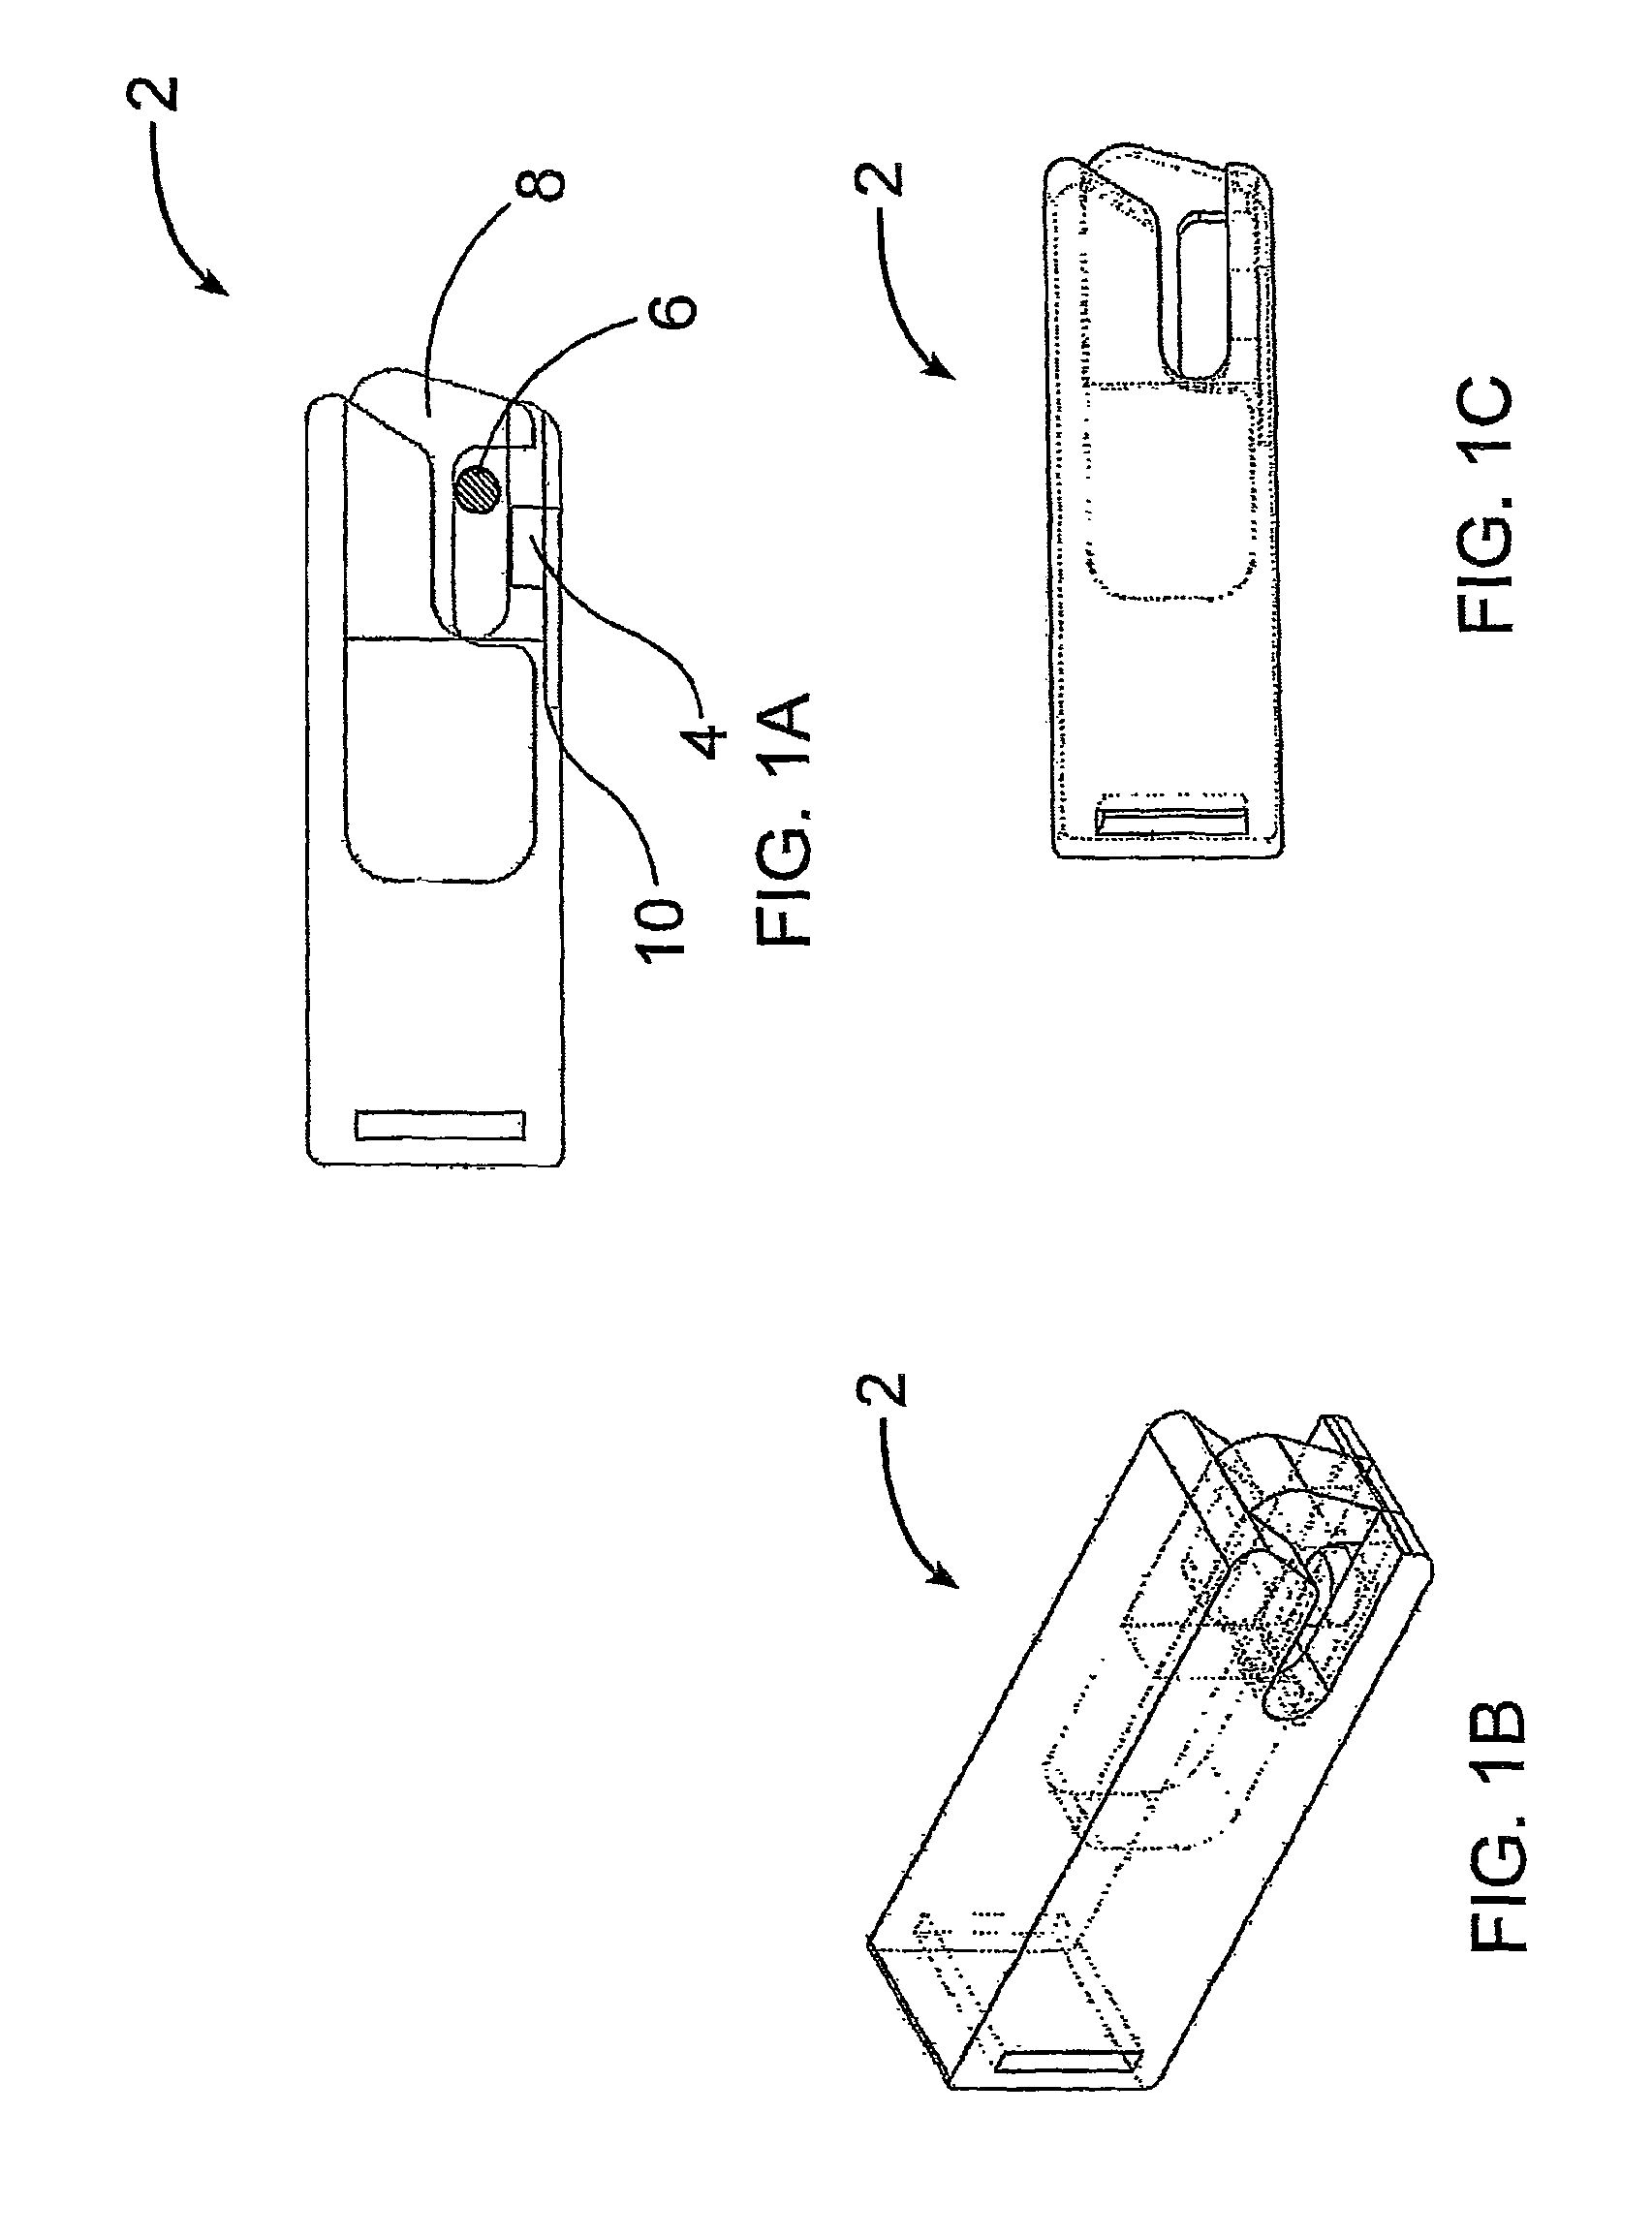 Child restraint system with automated installation